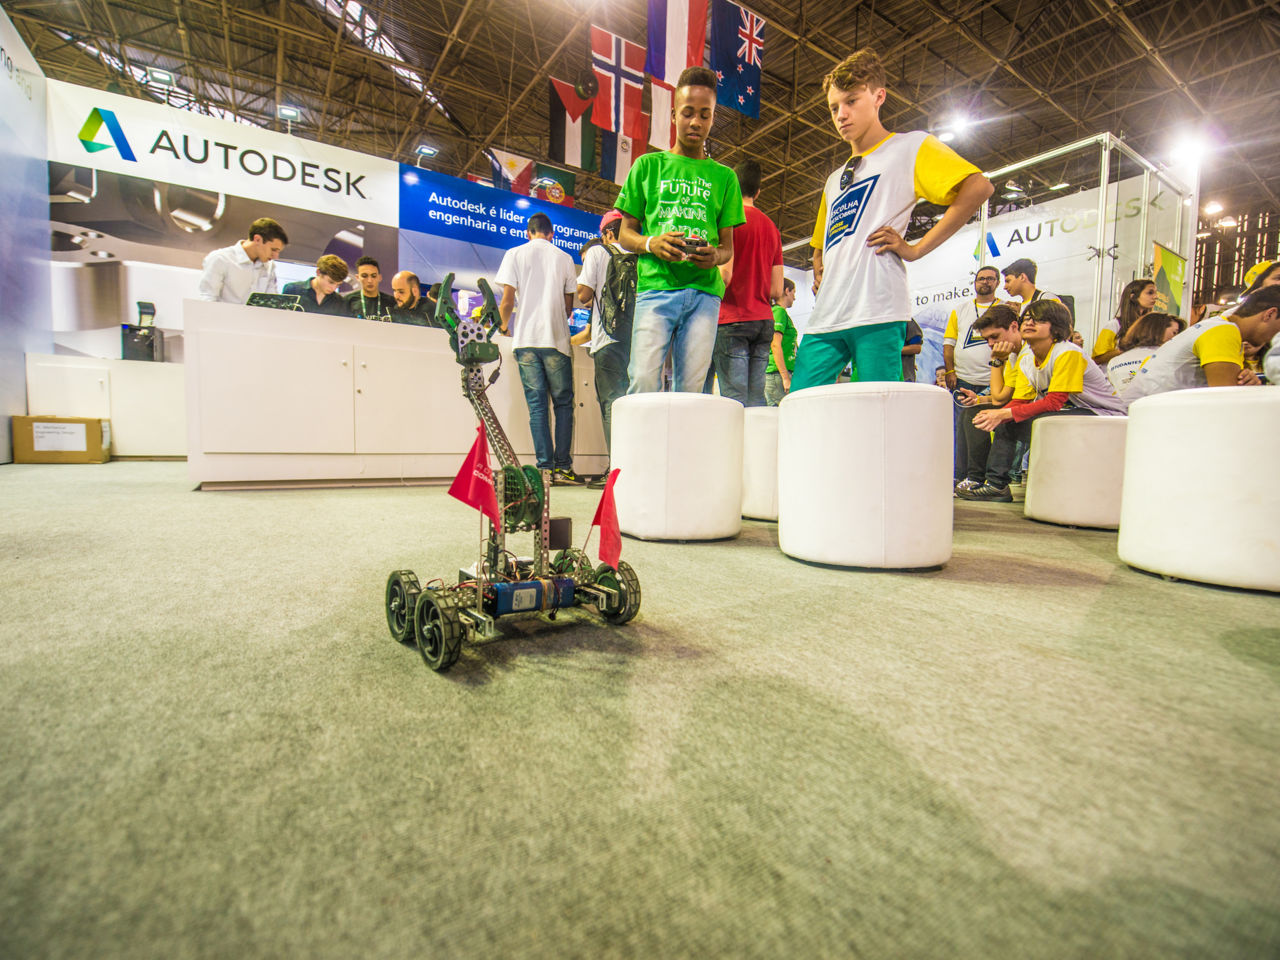 WorldSkills Global Partner Autodesk gives Competitors access to free software